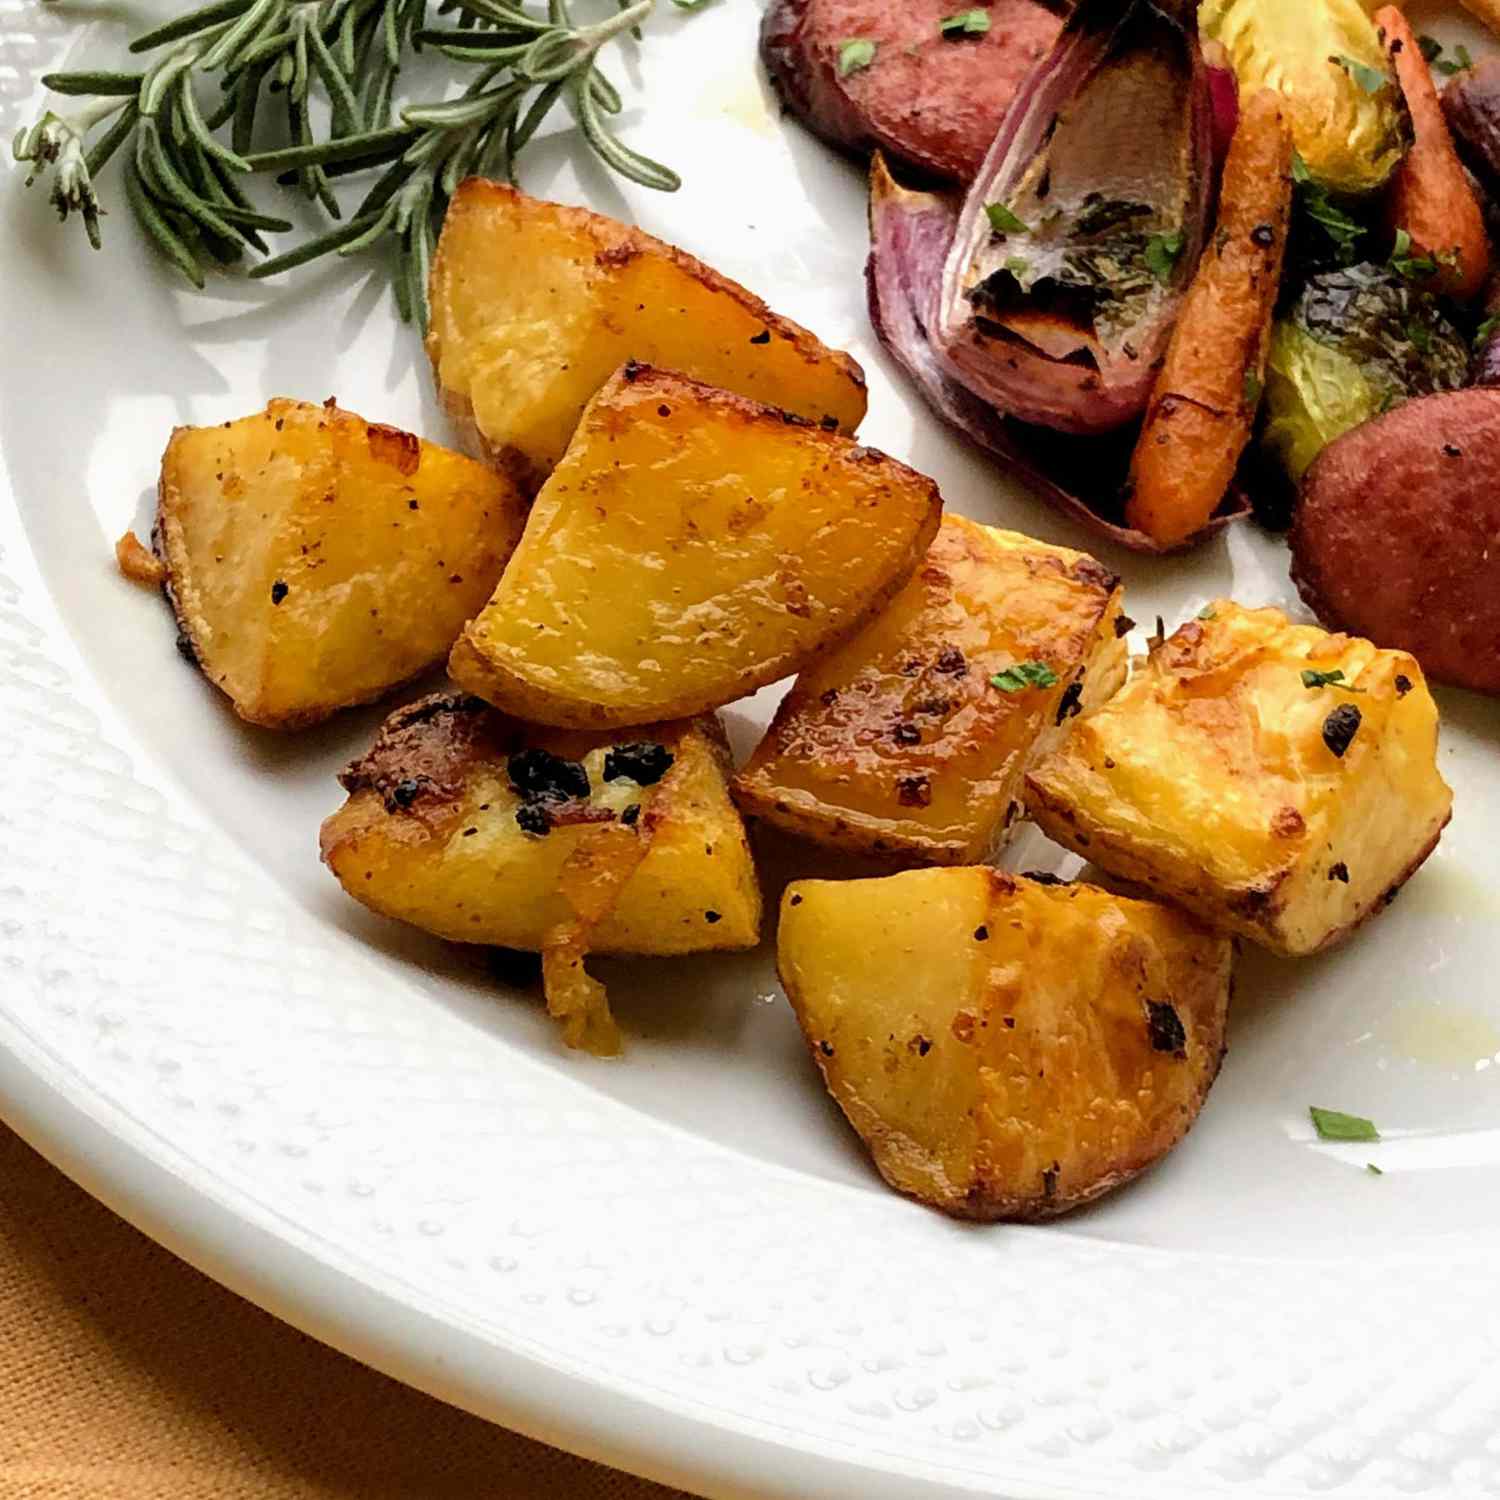 roasted potatoes with other roasted vegetables